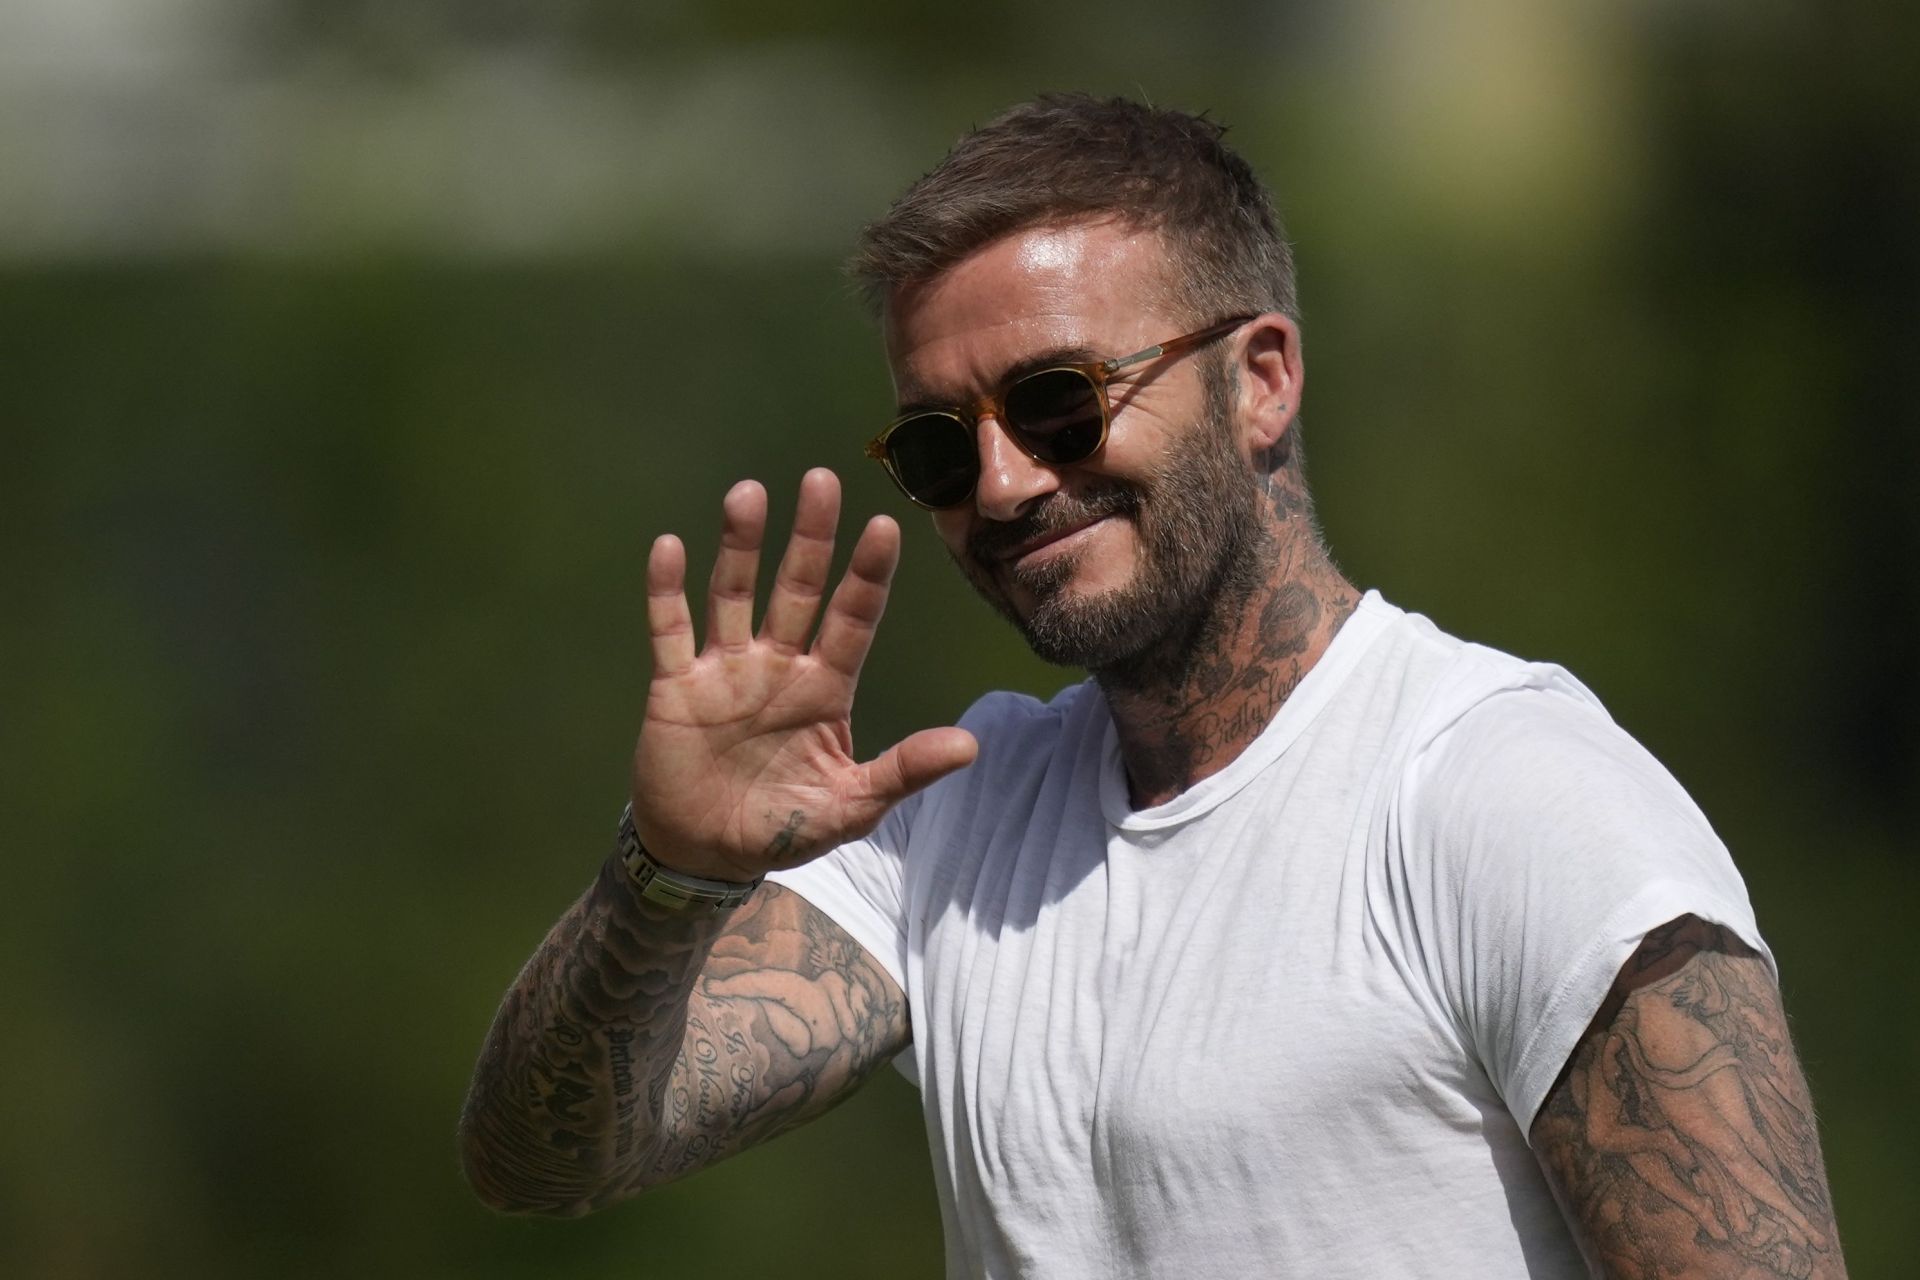 Beckham was asked if he would like to be part of a takeover of United.